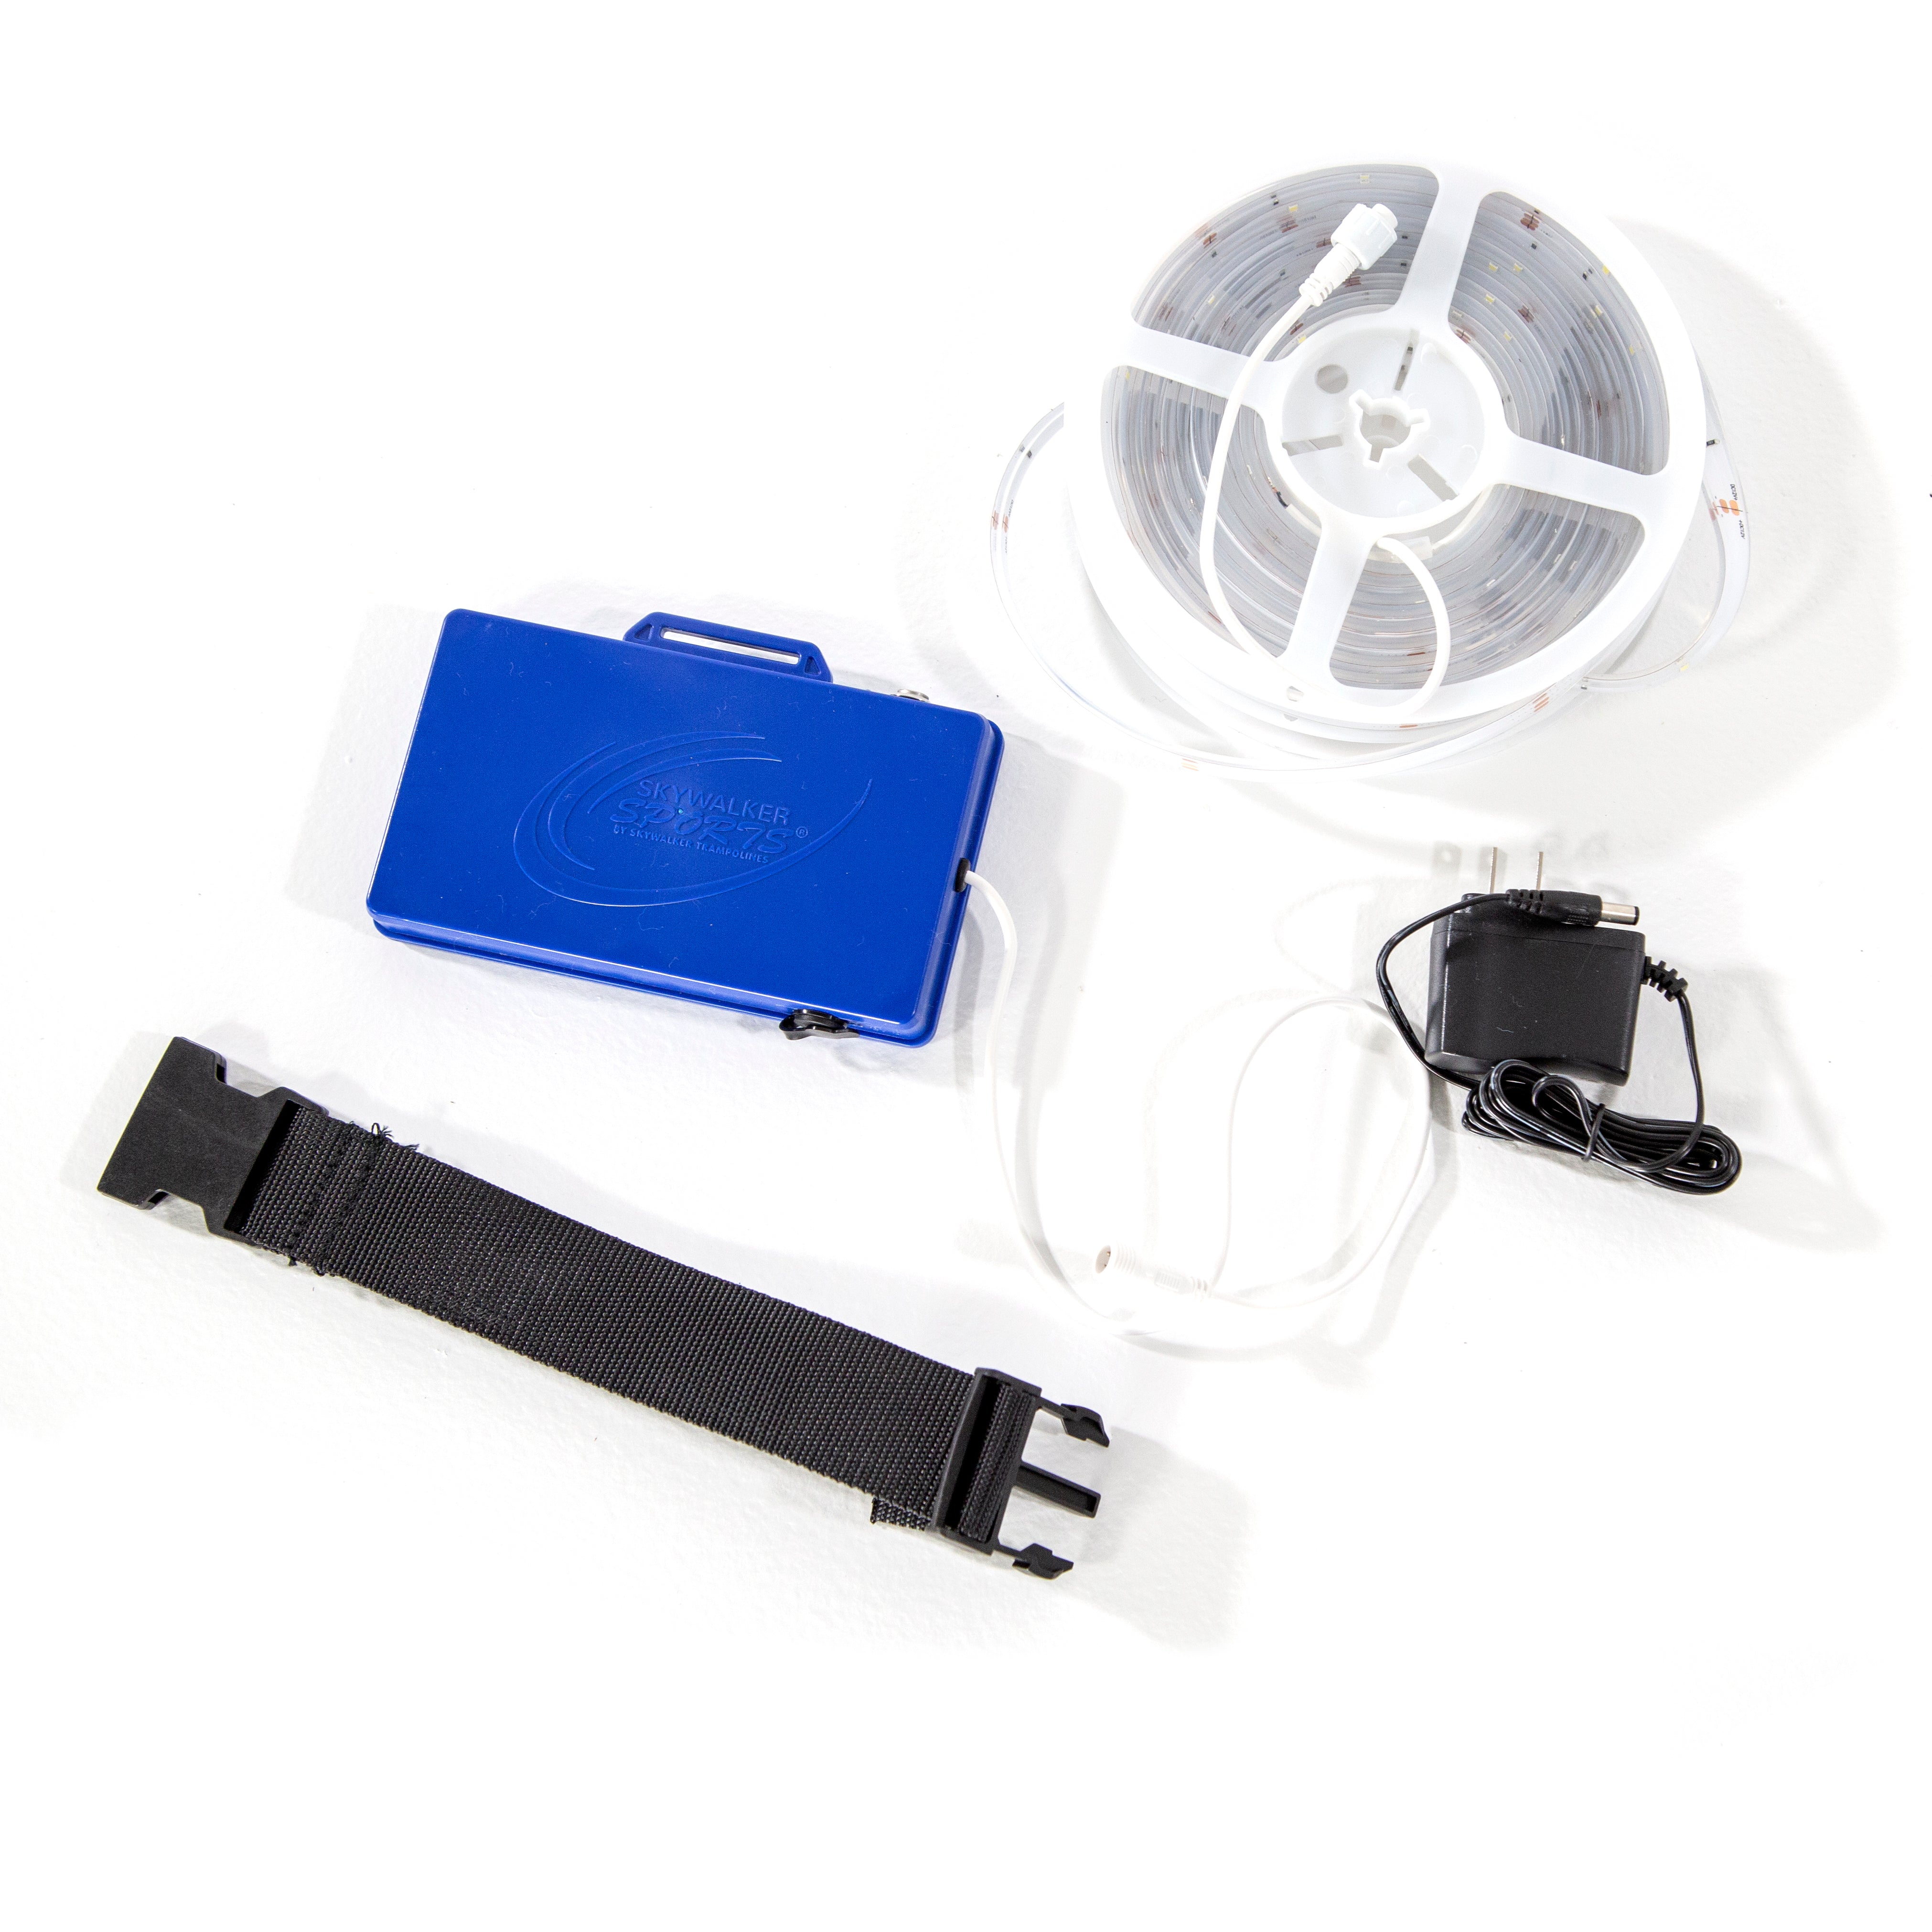 The lighted spring pad kit comes with a black strap, LED light strip, and a battery pack and charger. 